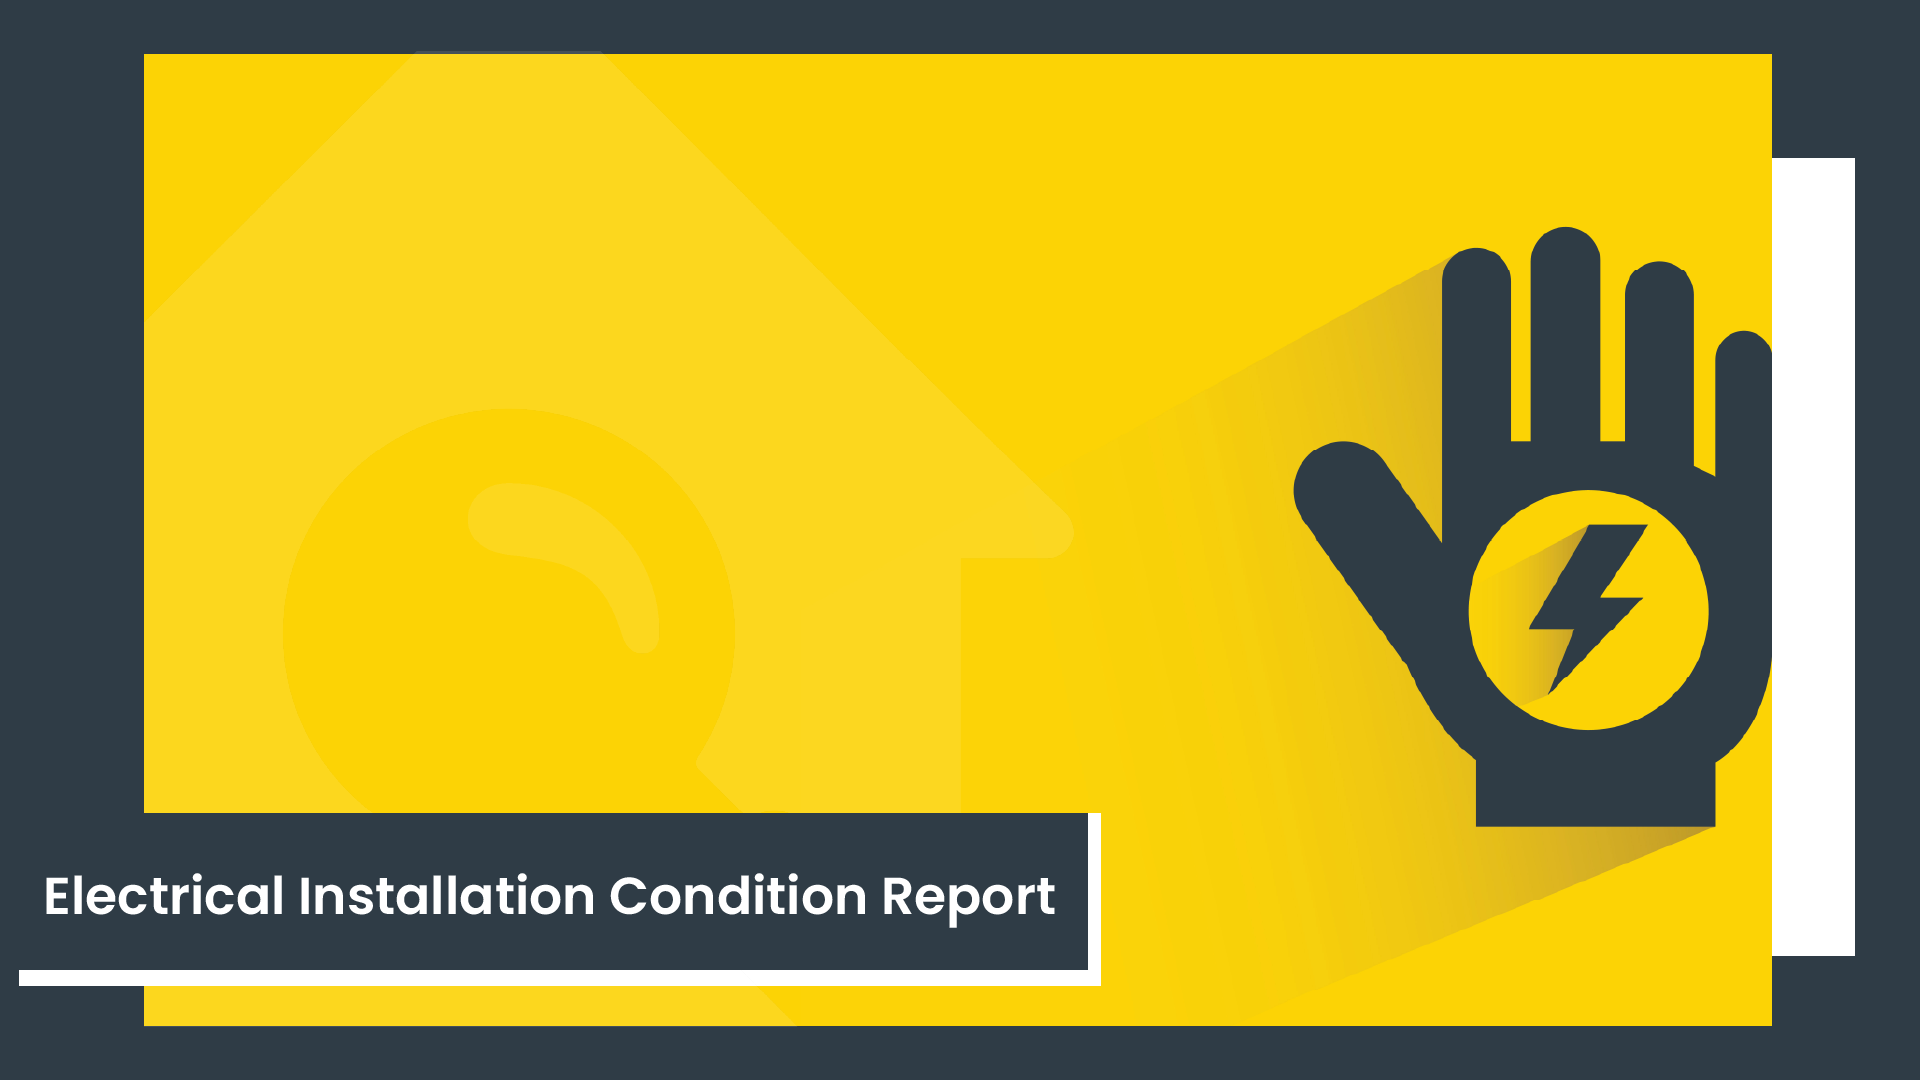 What is an Electrical Installation Condition Report (EICR) and why is it important?